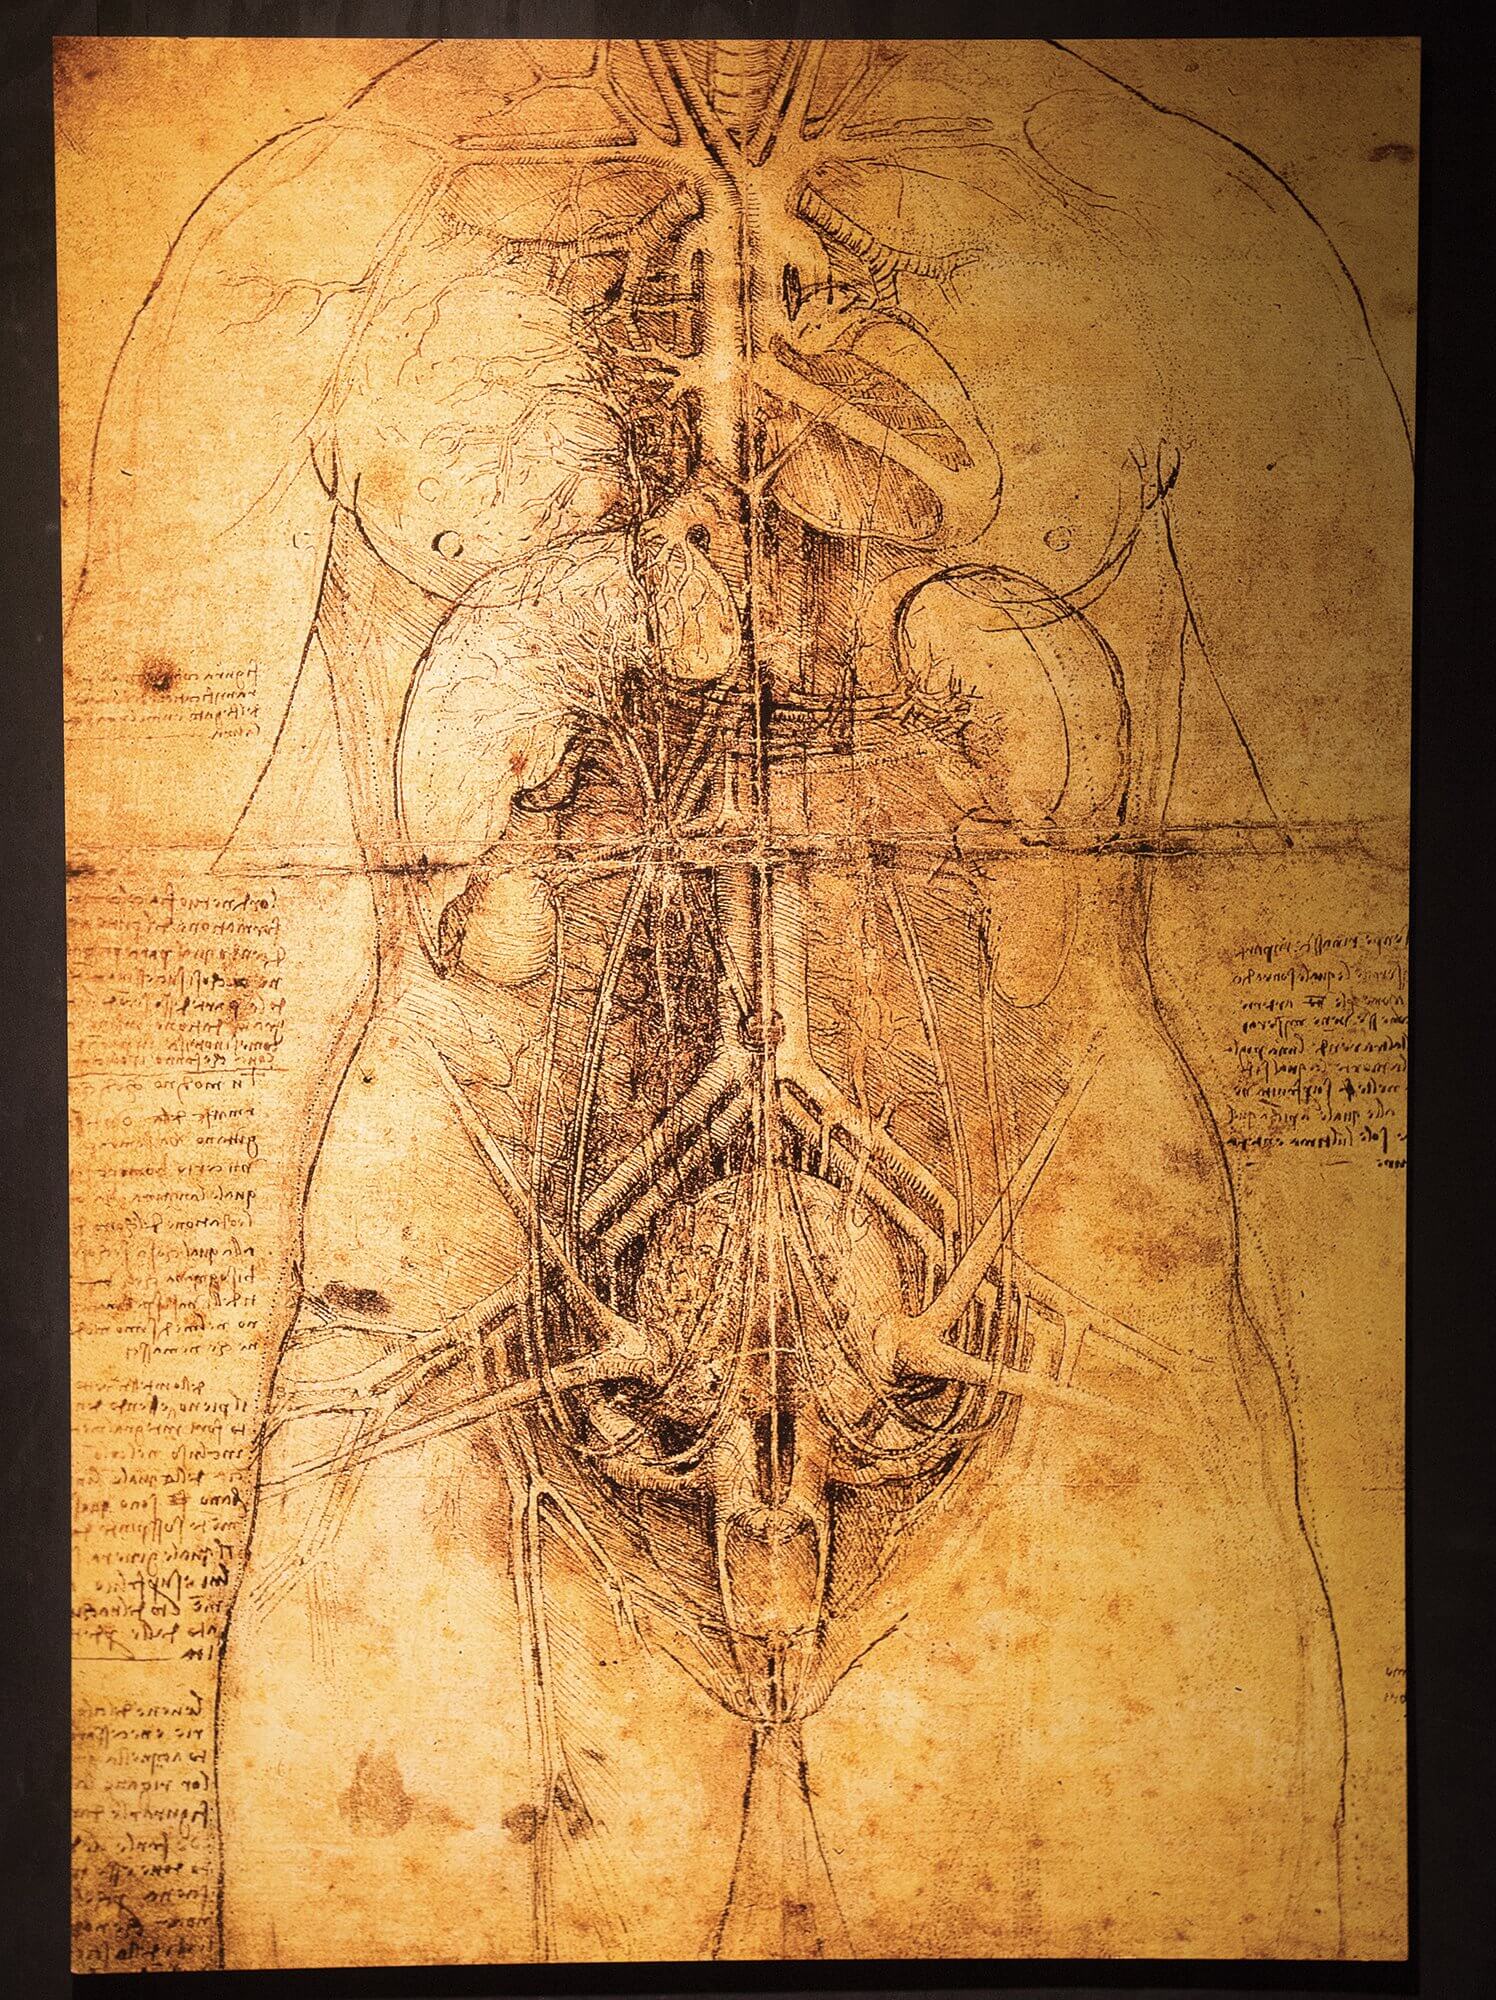 Copies of anatomical sketches by Leonardo da Vinci are on display at Moody Gardens.